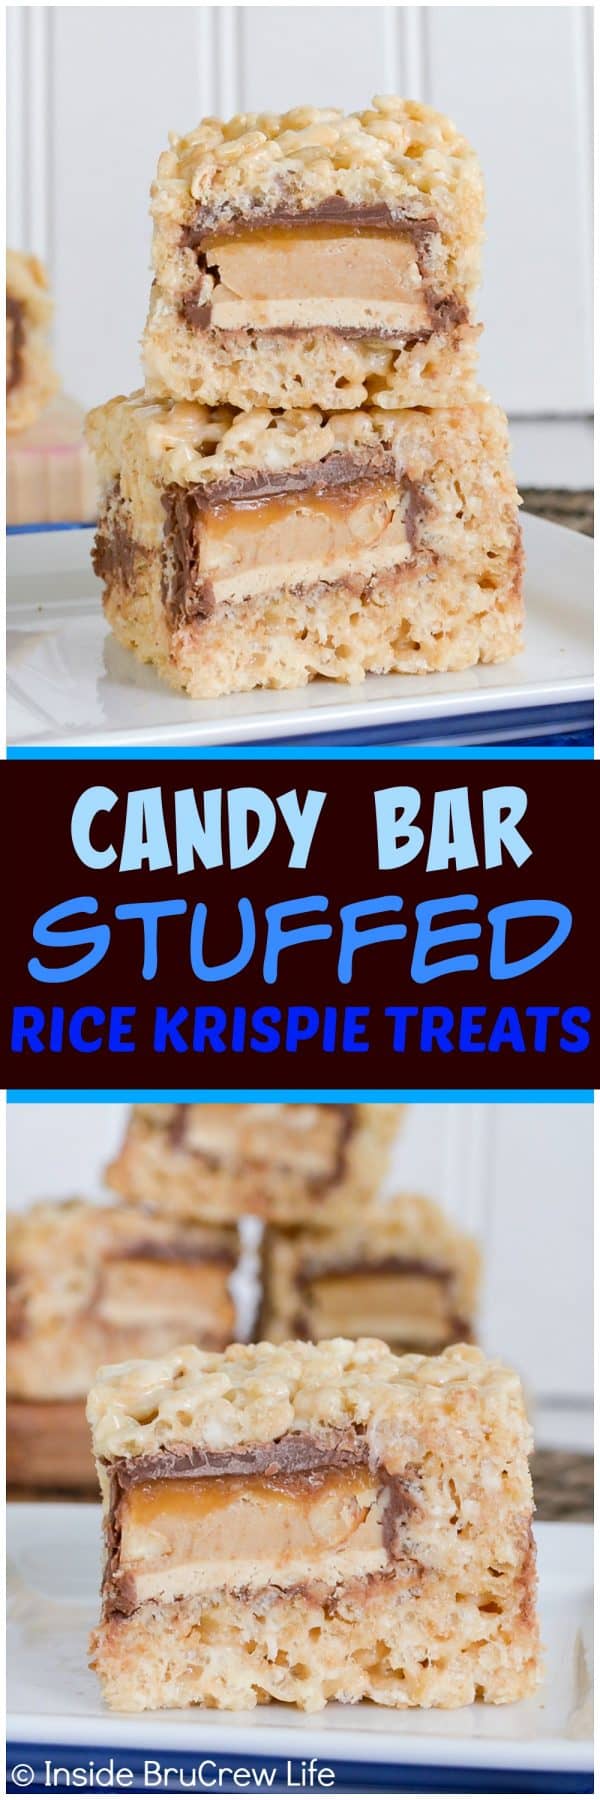 Candy Bar Stuffed Rice Krispie Treats - these easy no bake treats have a layer of candy bars hidden in the center. Easy dessert recipe for parties and picnics.